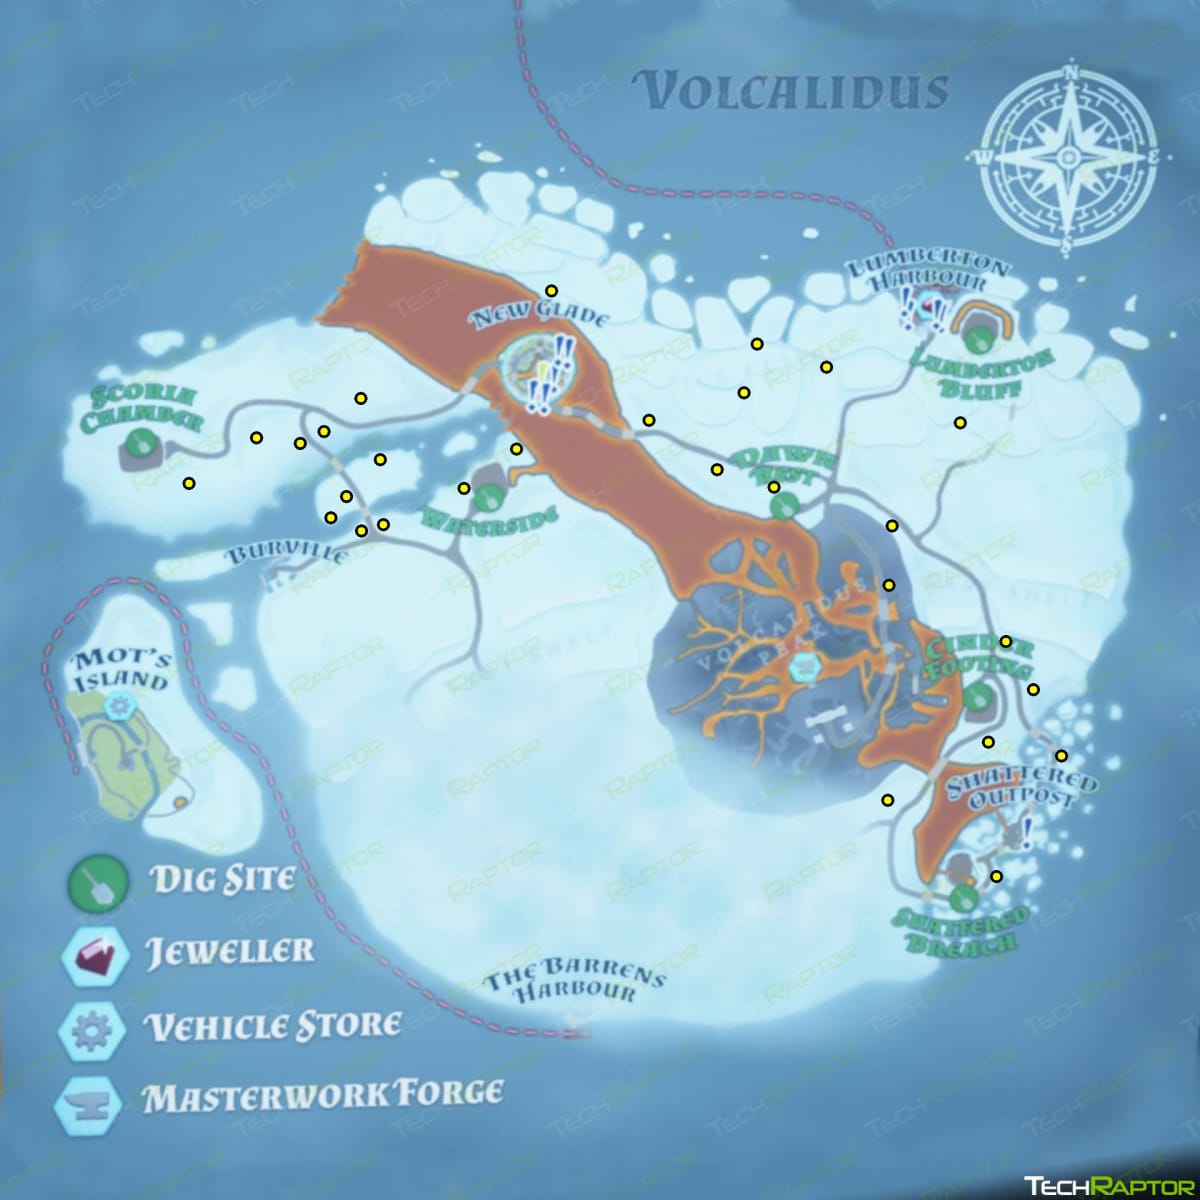 Hydroneer Volcalidus Map showing the location of Hydrosaur Bones